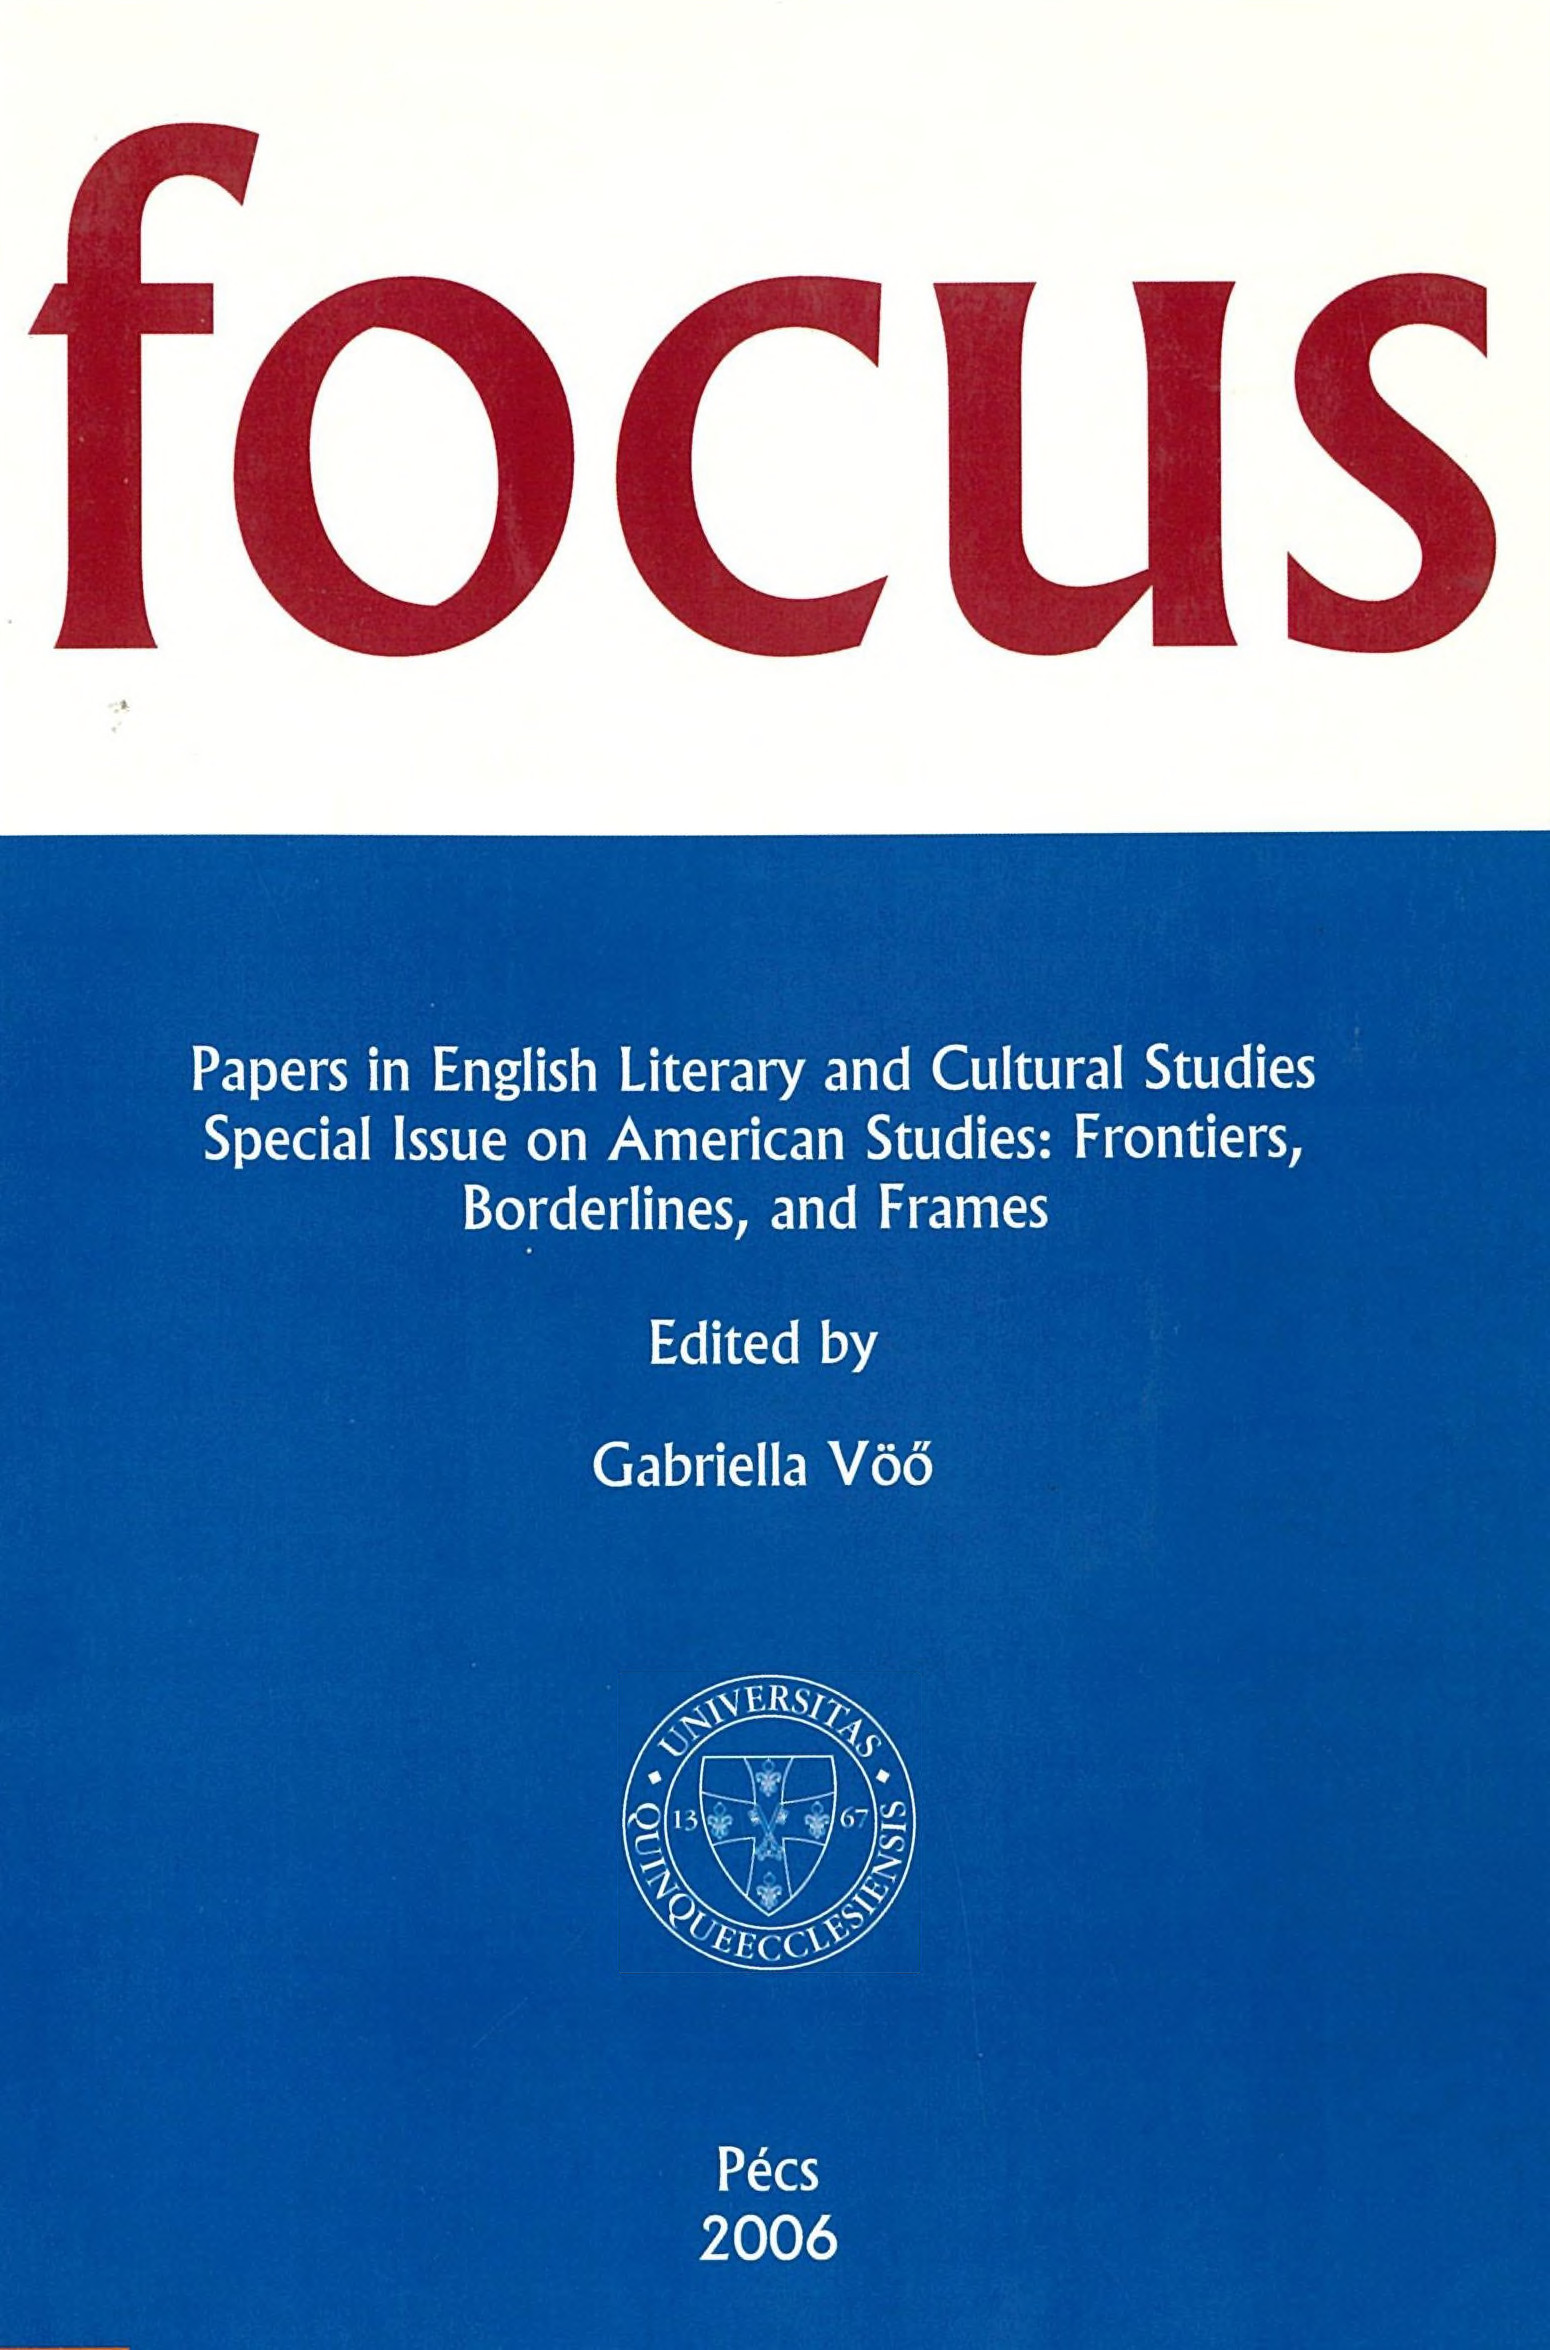 					View Vol. 5 No. 1 (2006): Papers in English Literary and Cultural Studies Special Issue on American Studies: Frontiers, Borderlines, and Frames
				